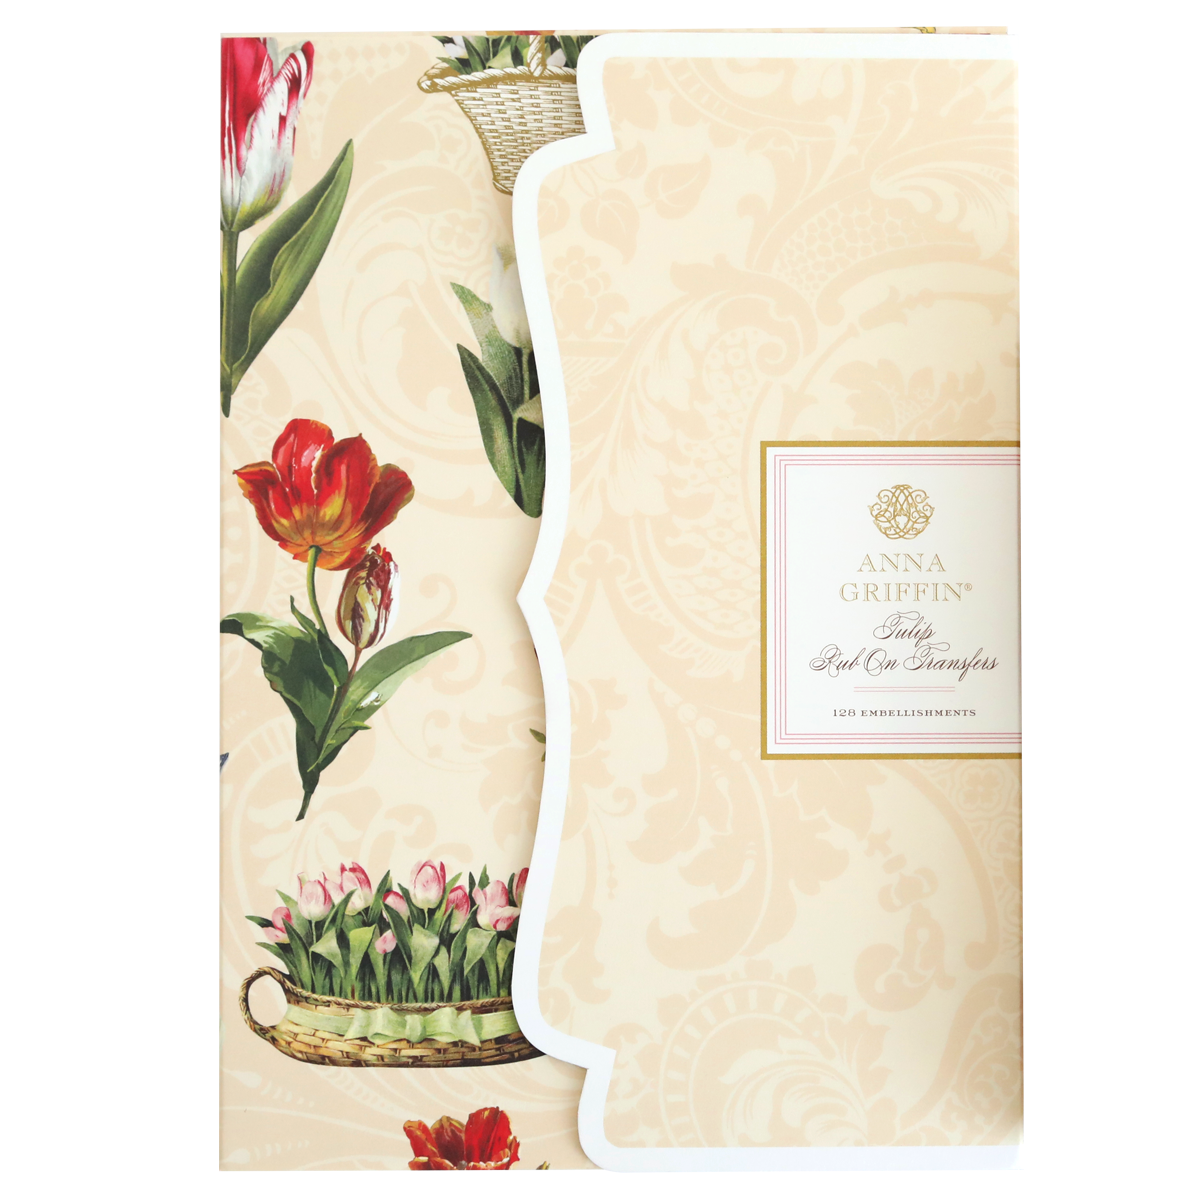 A notebook embellished with Tulip Rub On Transfers of tulips and flowers, ideal for crafting.